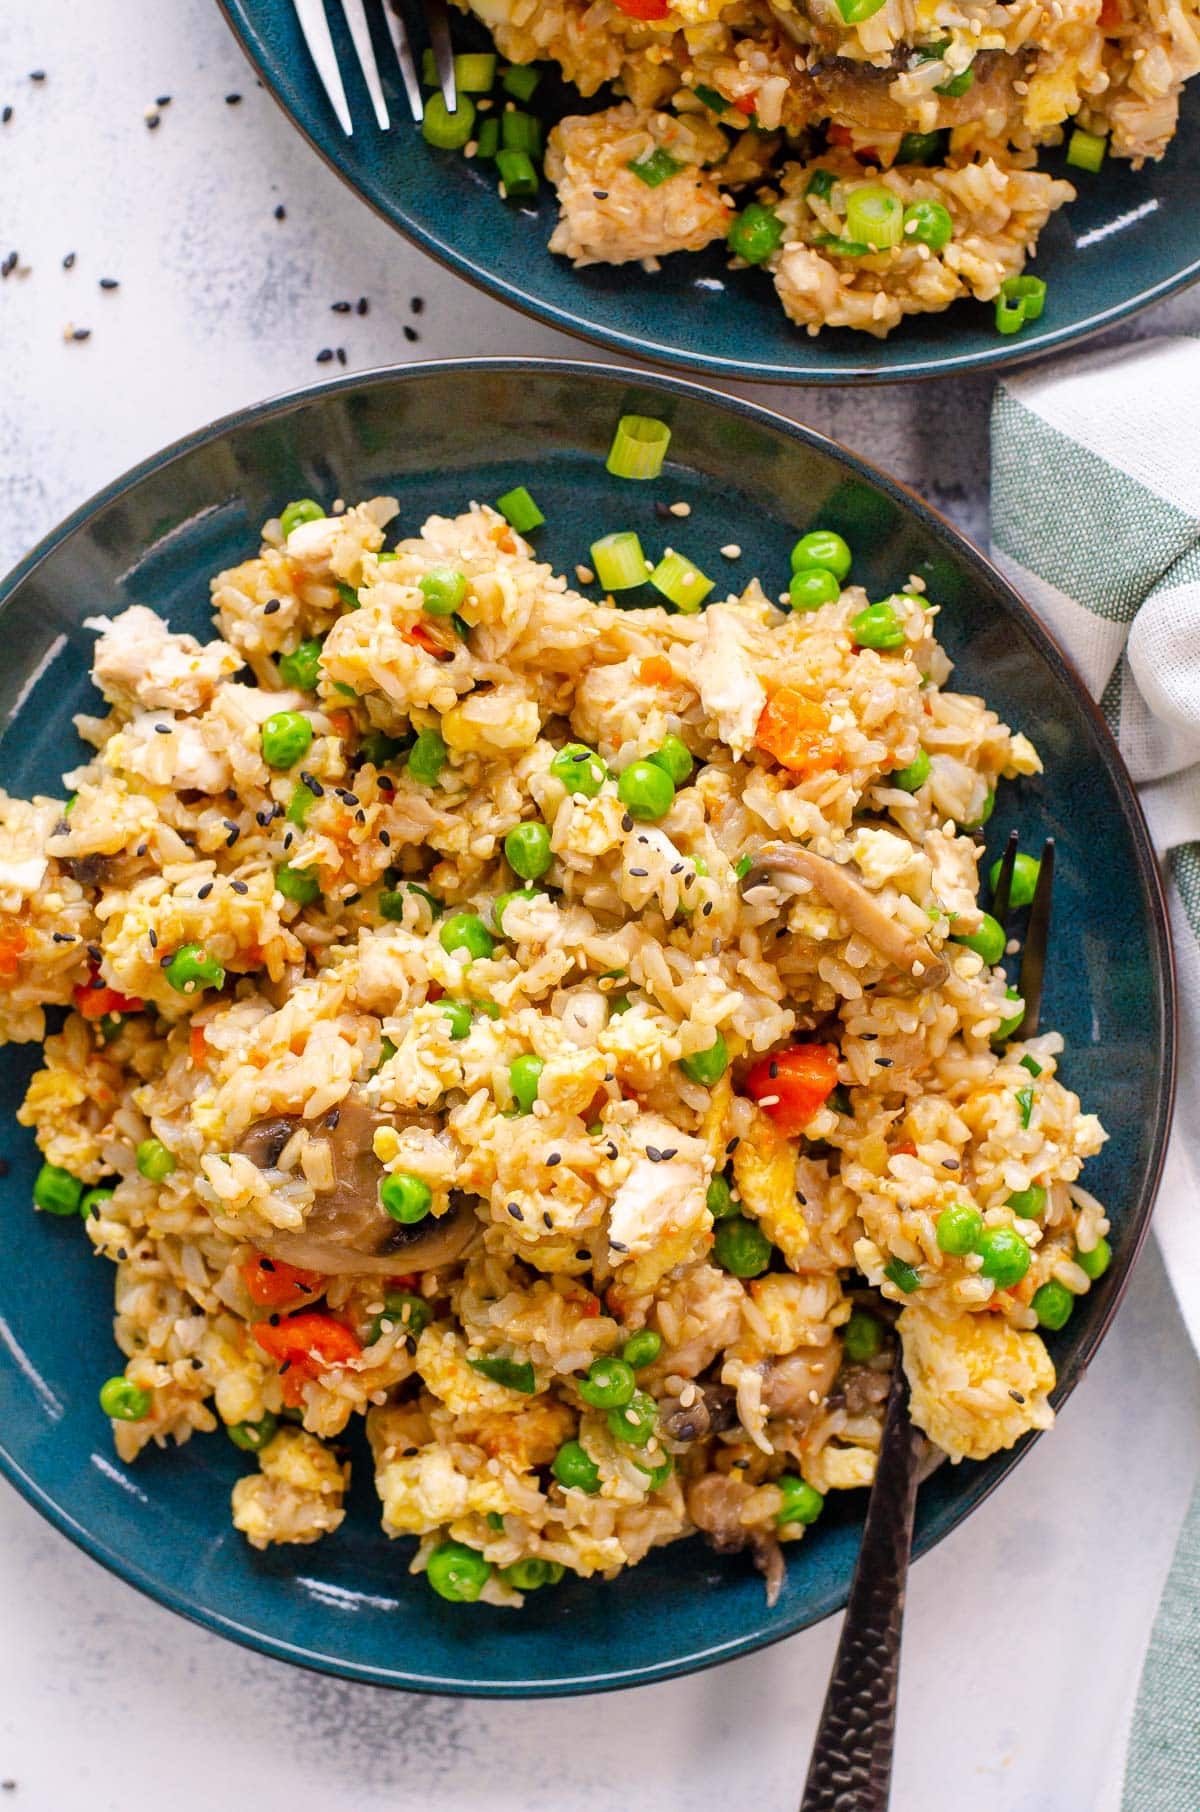 Instant pot chicken fried rice with mushrooms, peas, carrots and garnished with sesame seeds  plate.